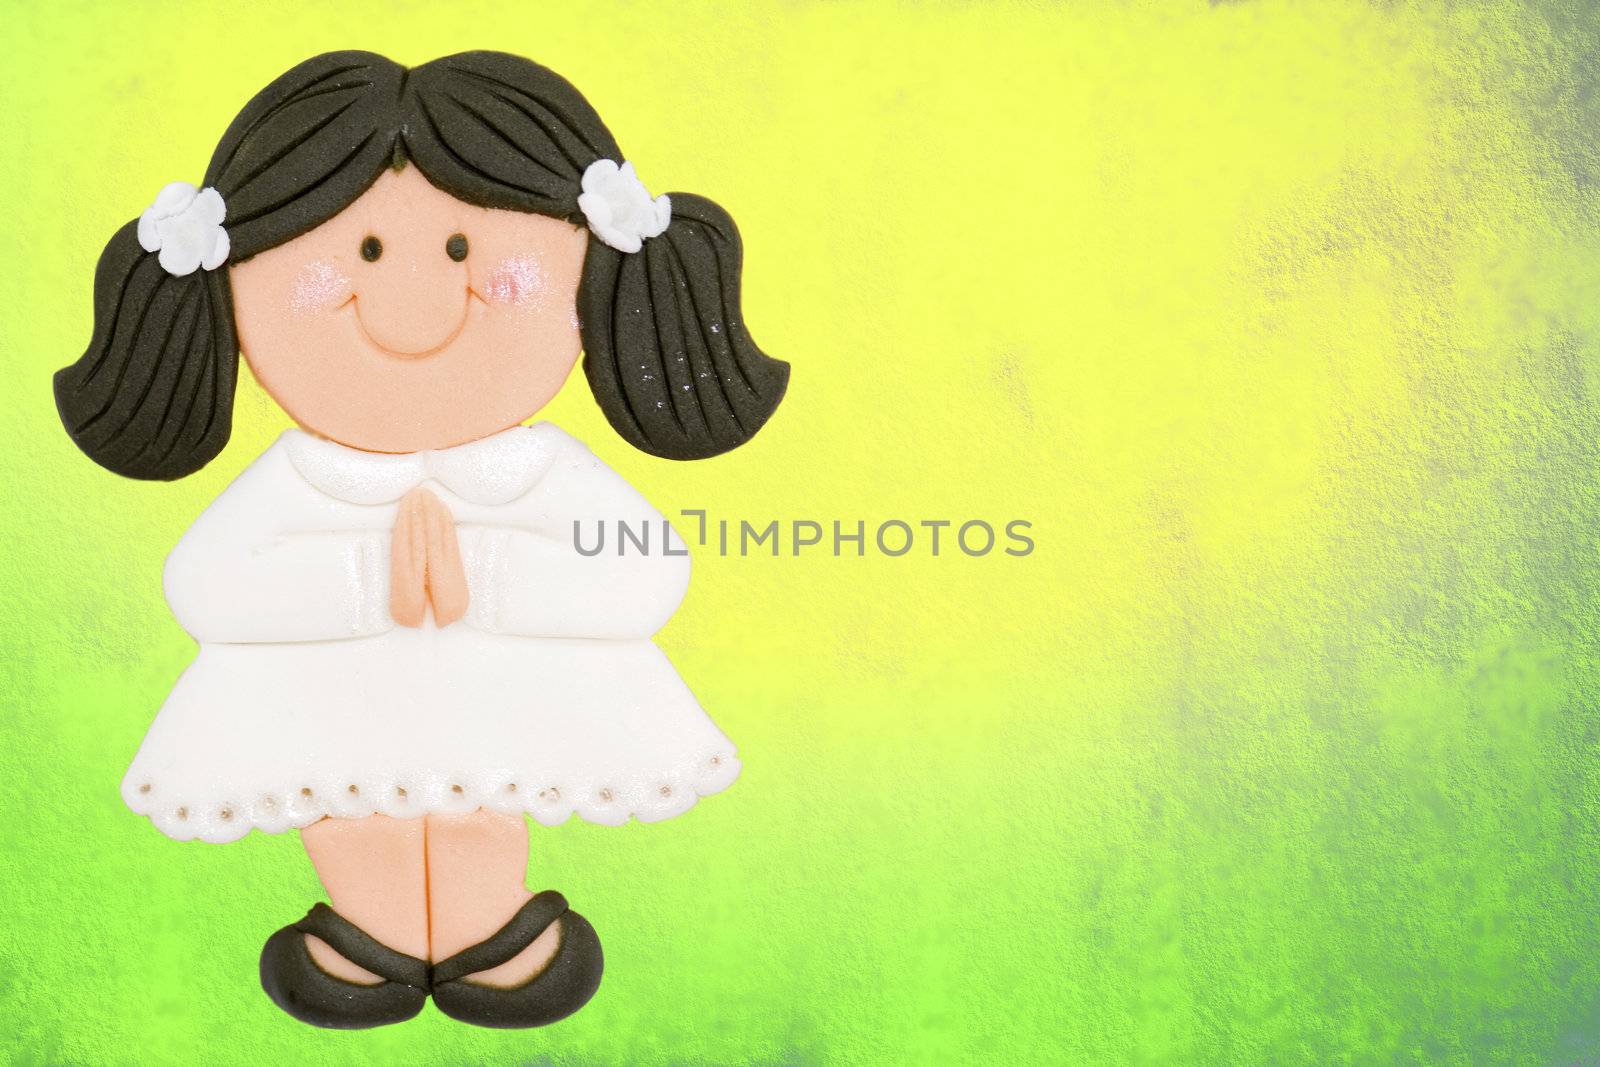 greeting invitation card, first communion girl brown, colorful background